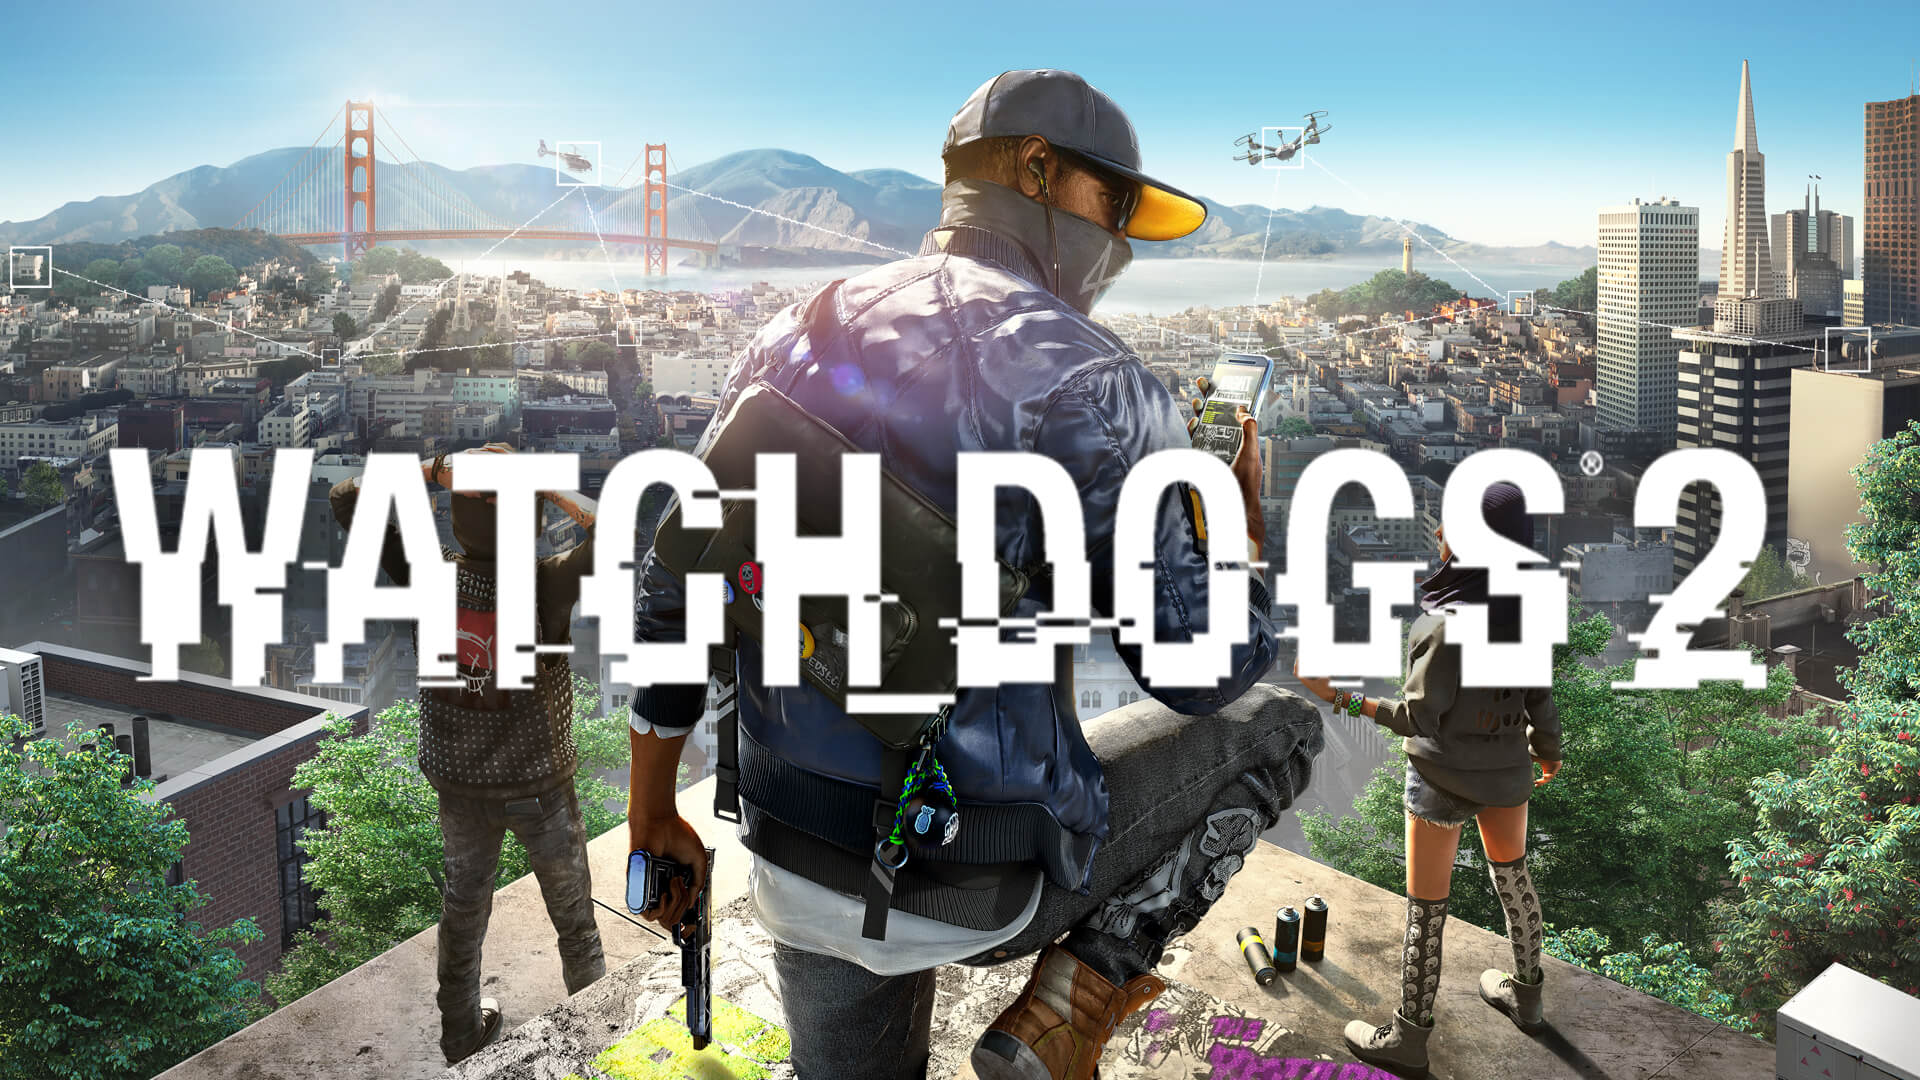 Watch Dogs 2 Mobile Game Full Version Download